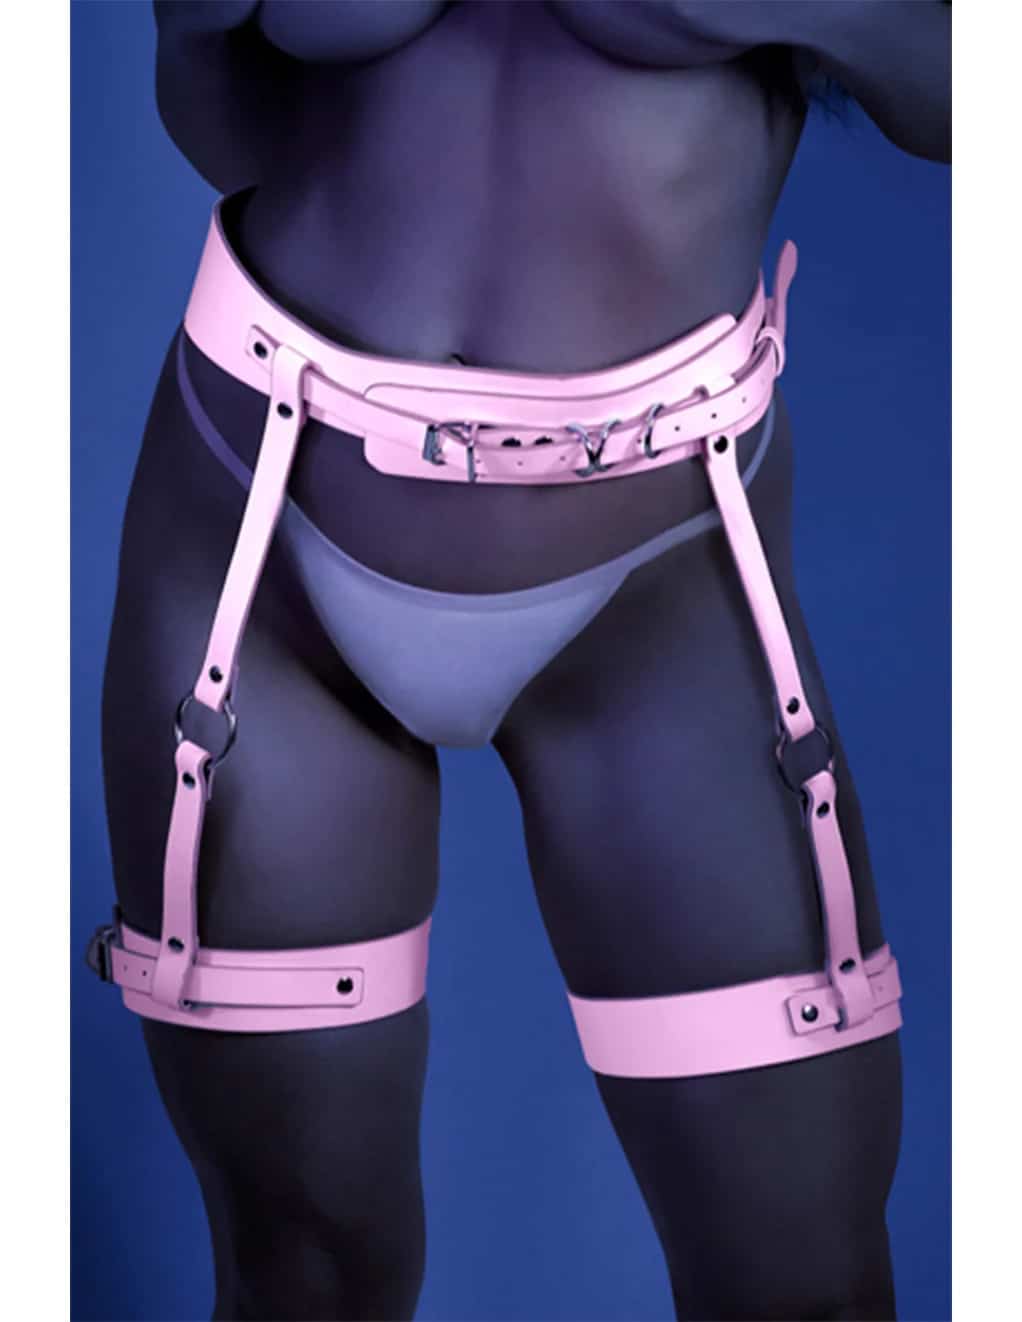 Glow Strapped In Leg Harness